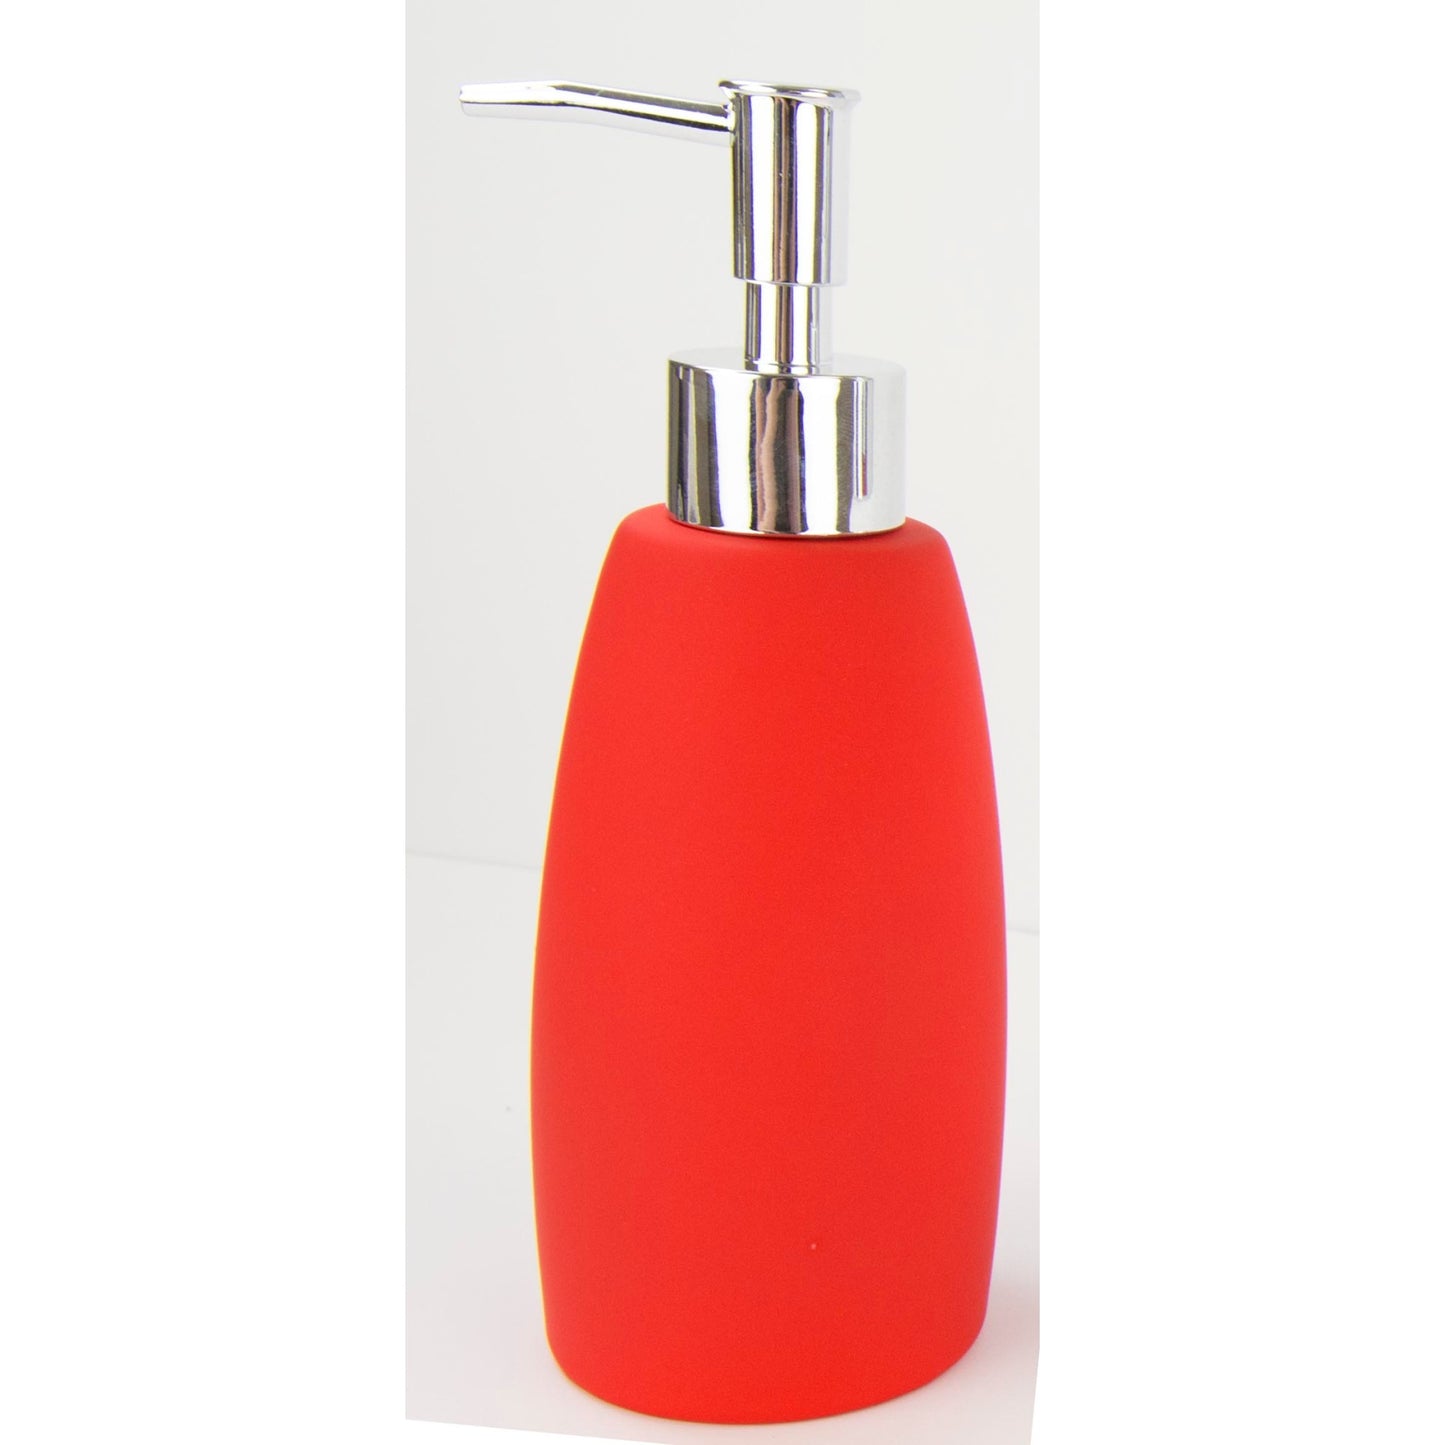 Home Basics Rubberized Ceramic Cylinder Soap Dispenser, Red - Red